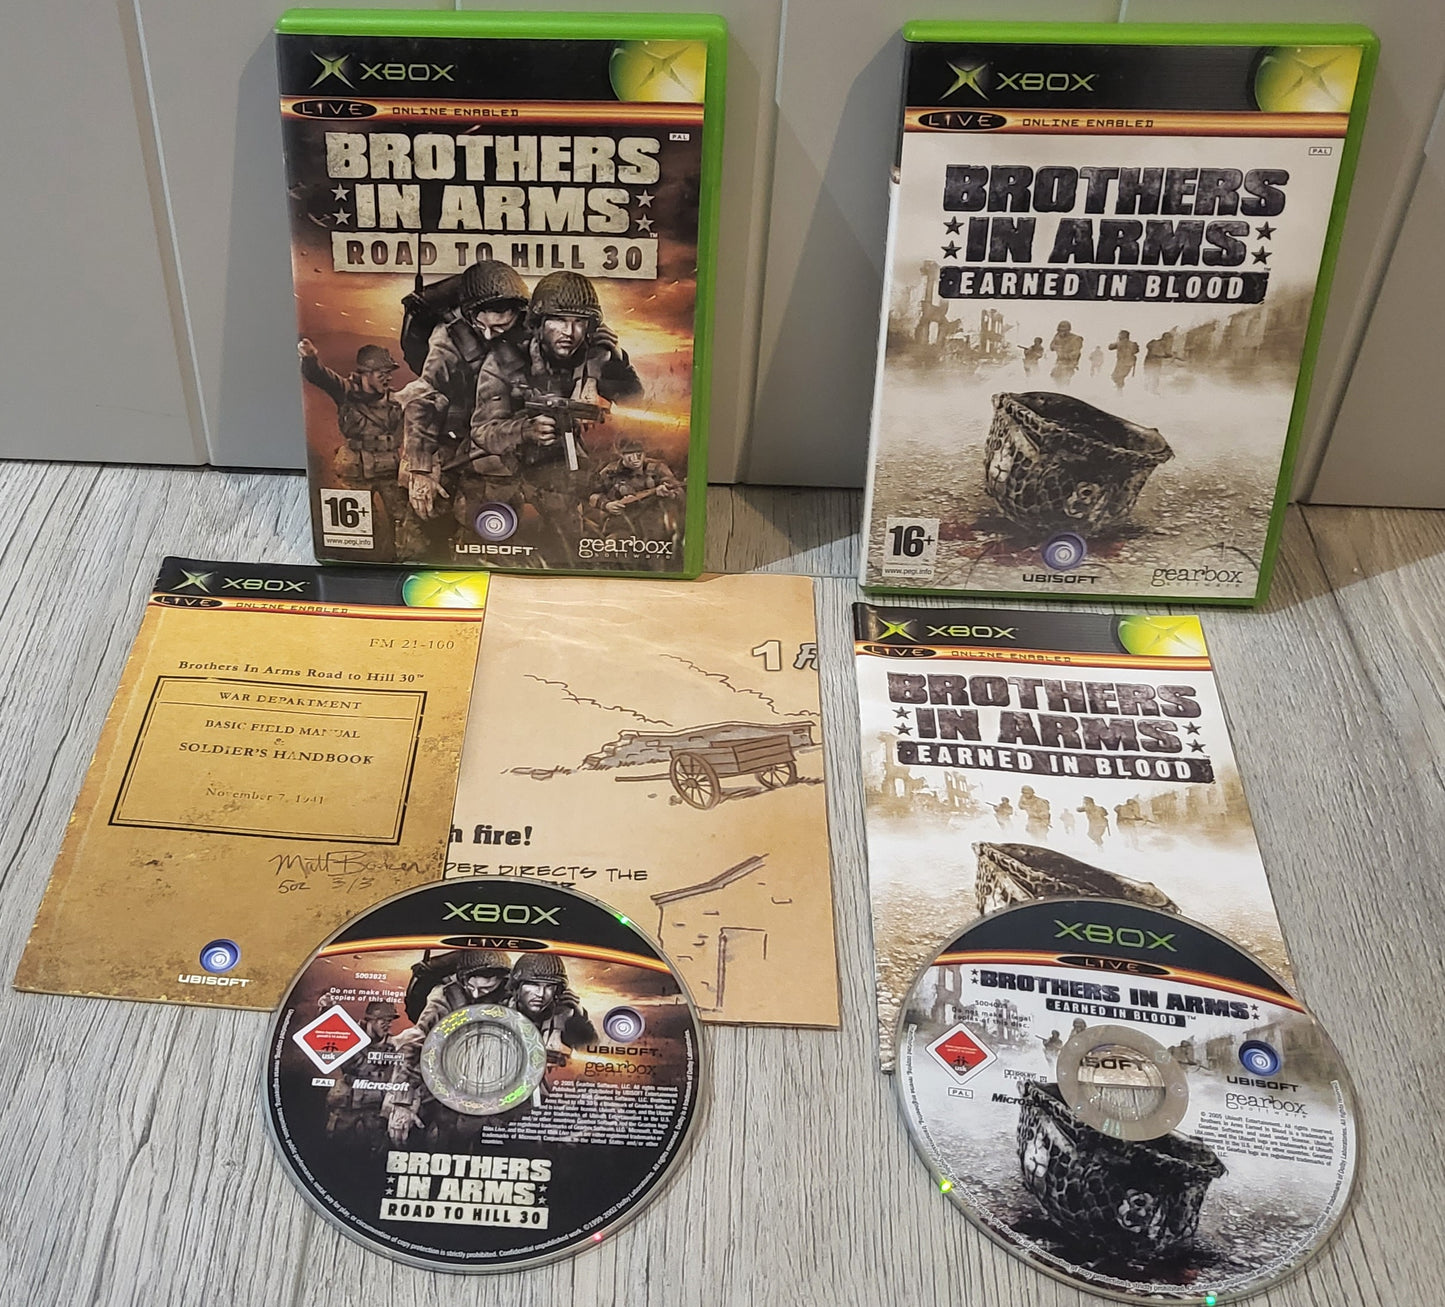 Brothers in Arms Road to Hill 30 with Map & Earned in Blood Microsoft Xbox Game Bundle